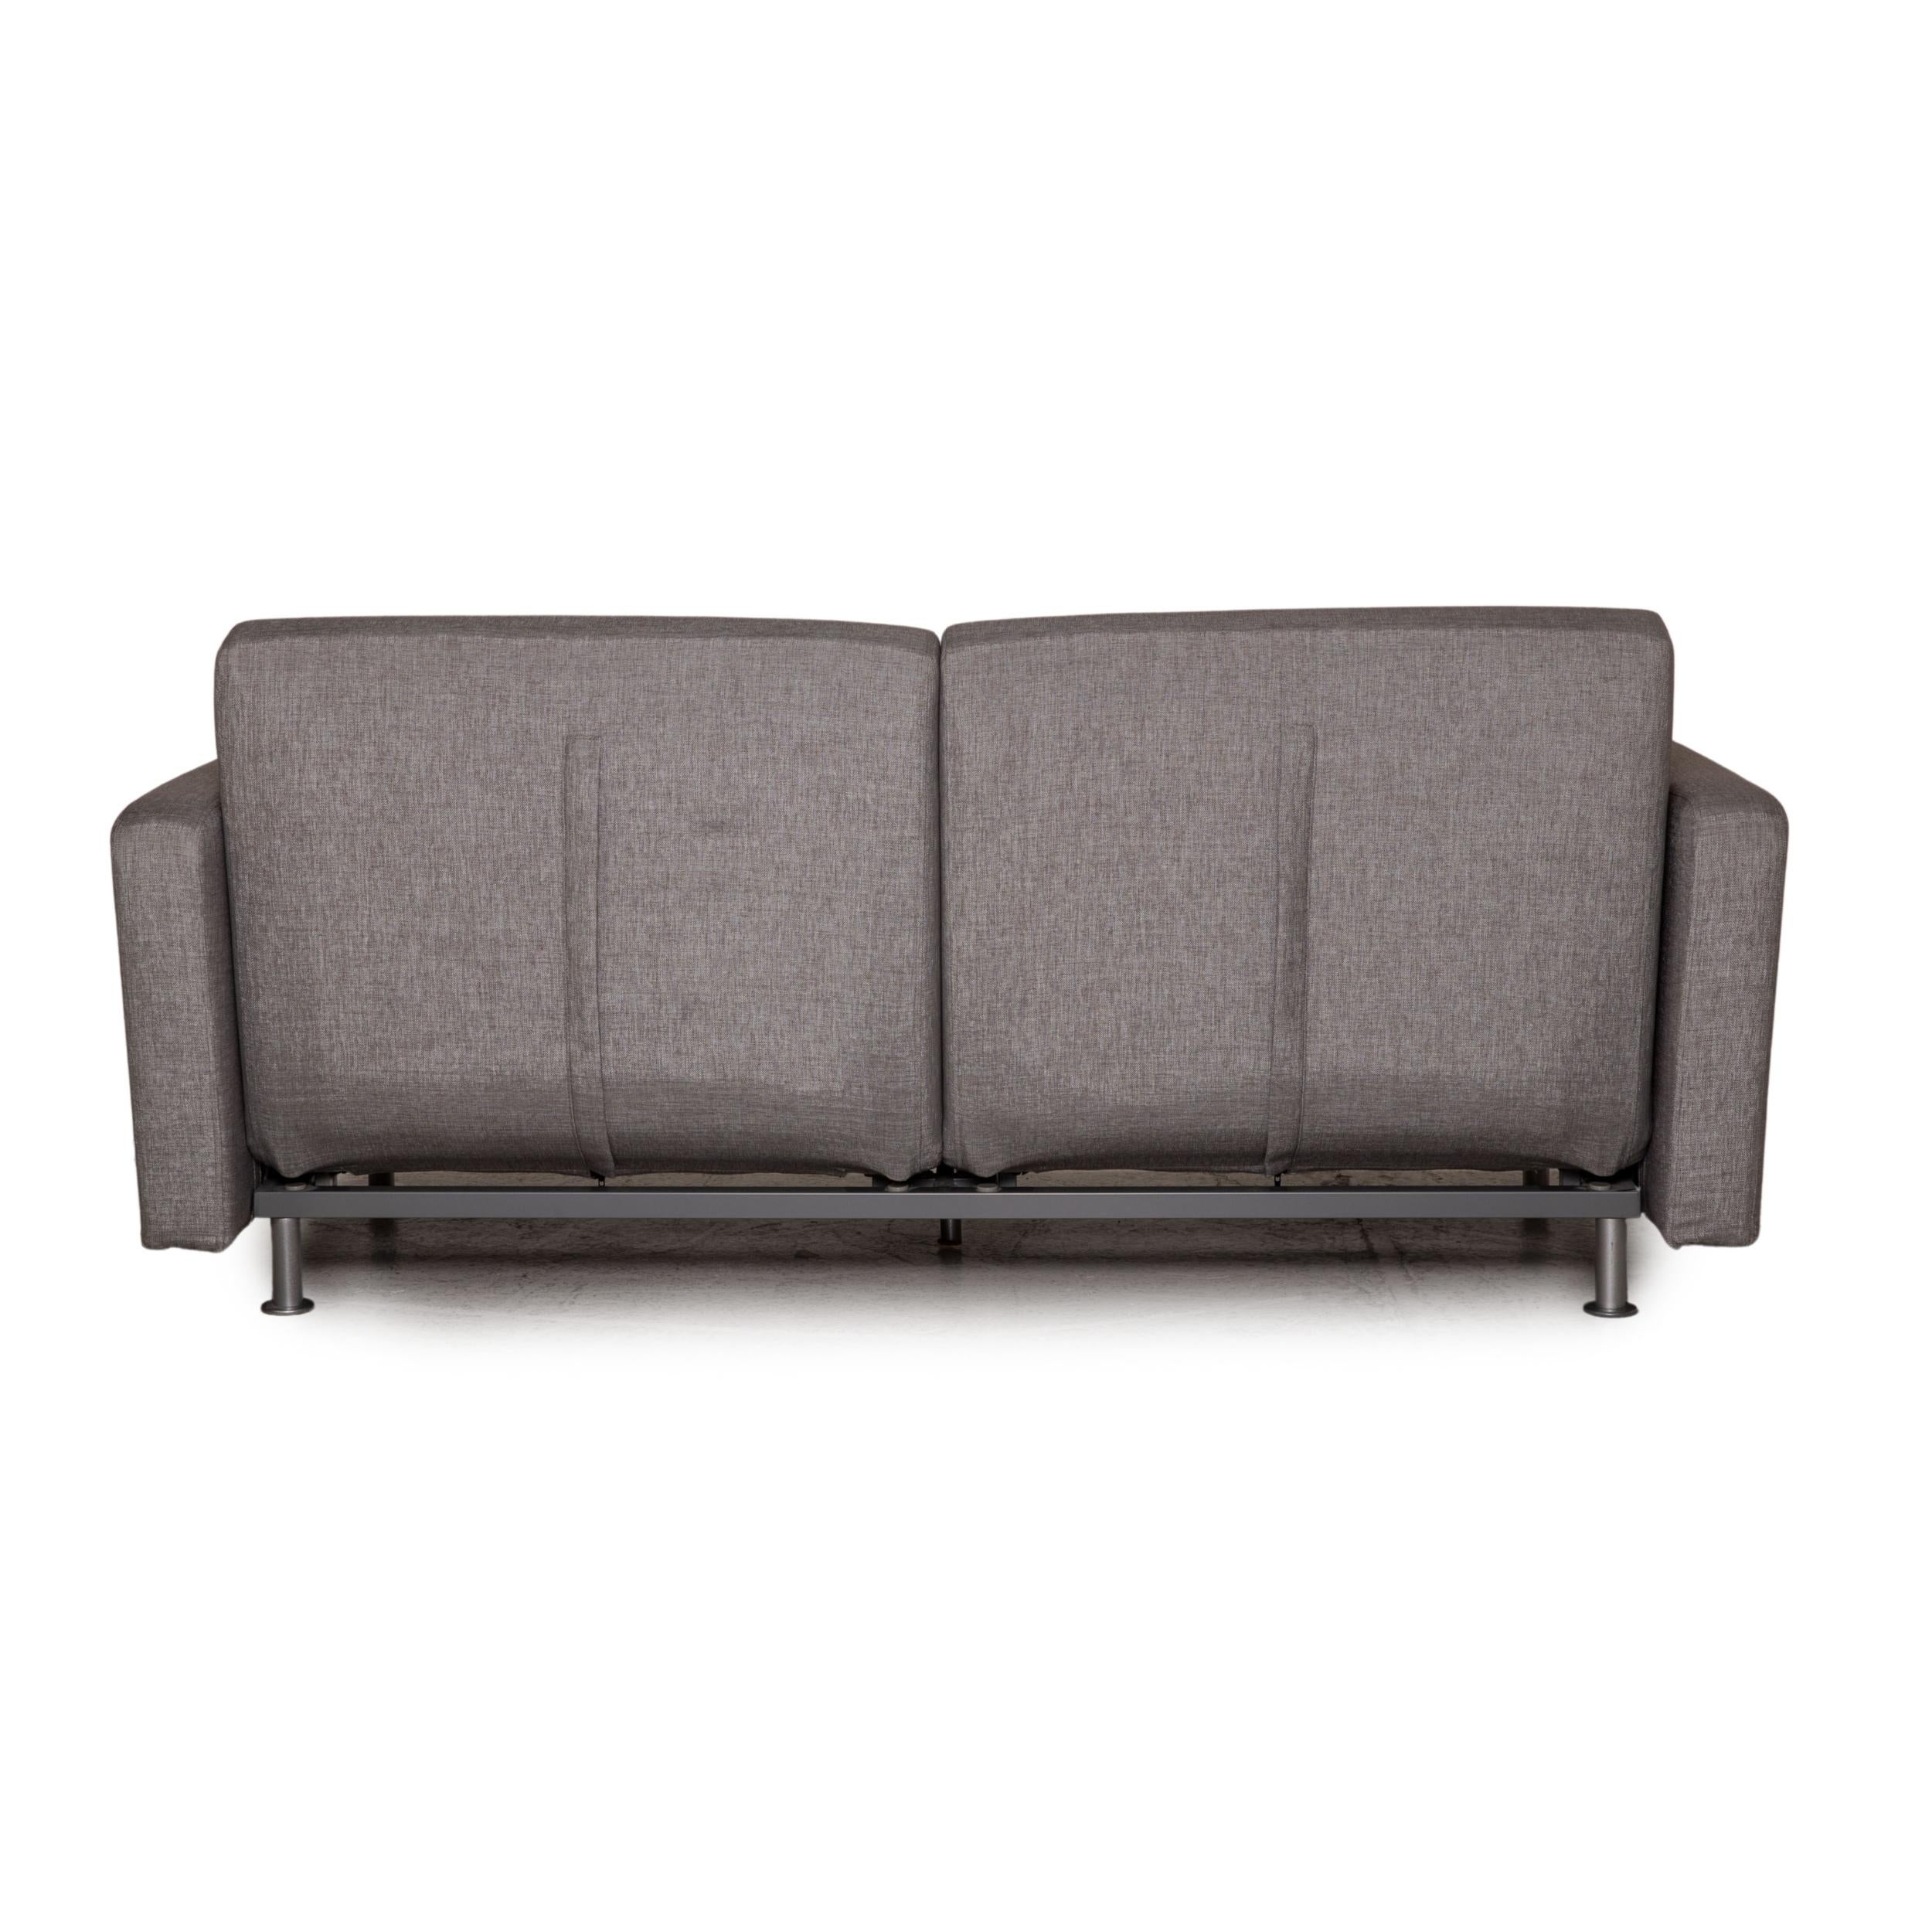 BoConcept Melo Sofa Fabric Gray Two-Seater Couch Function Sleeping Function 5